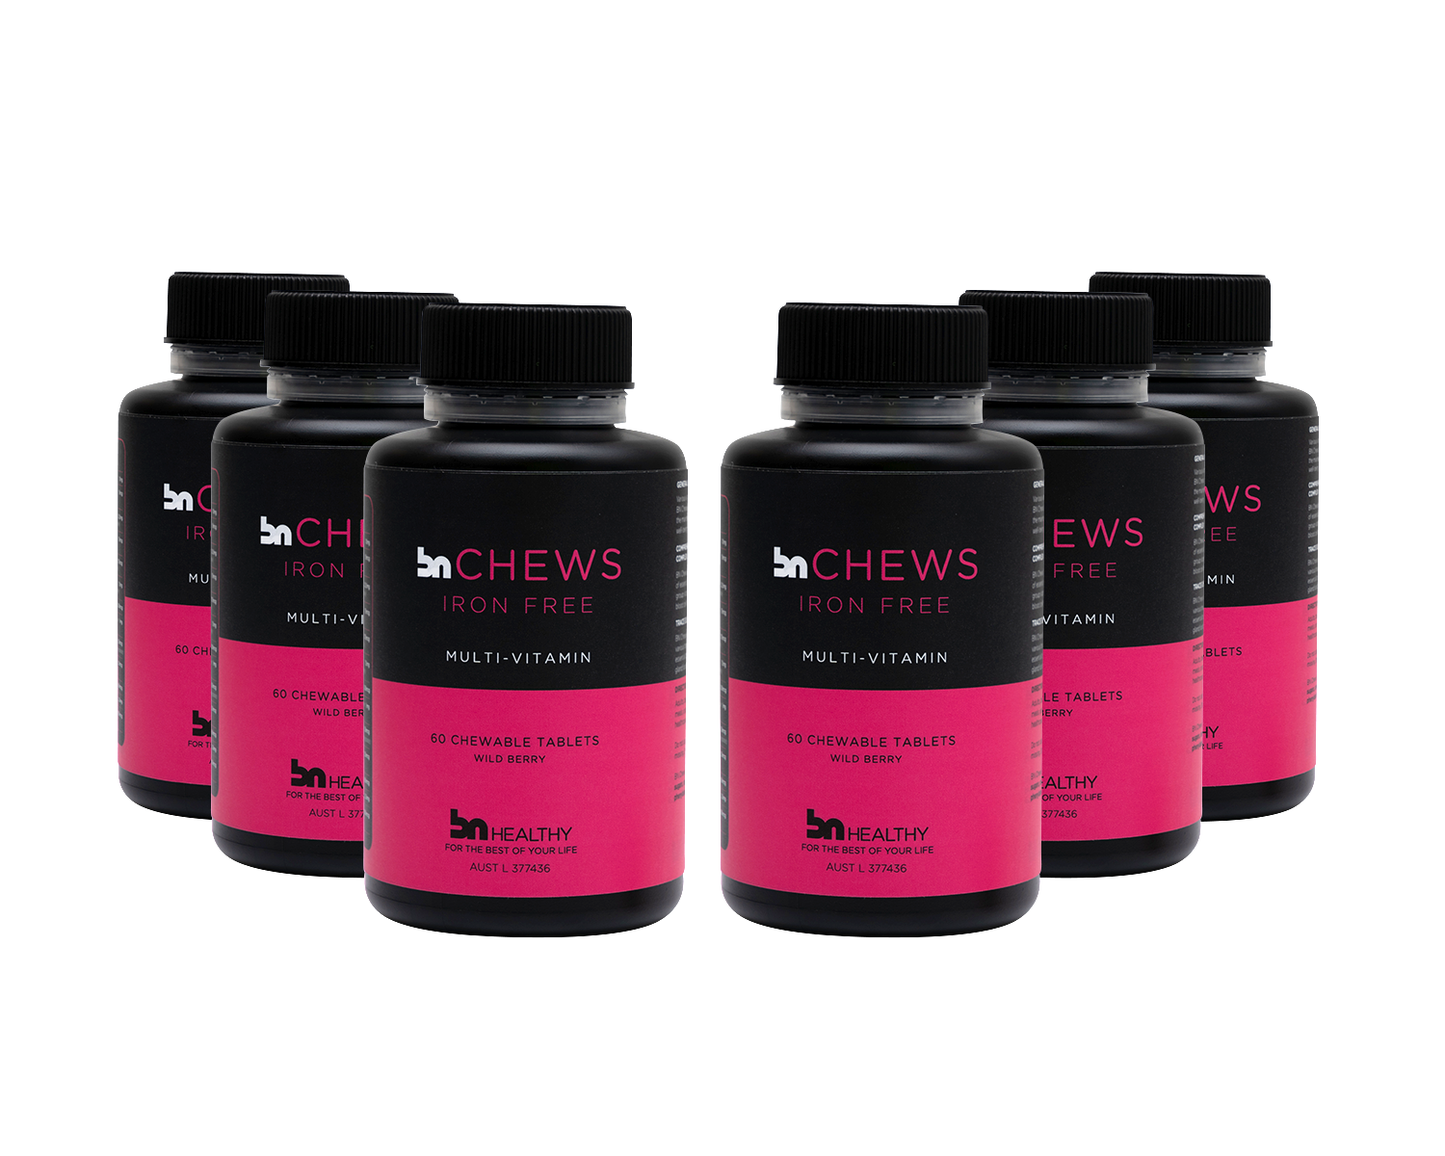 BN Chews Iron Free - Chewable Multivitamins - 6 Month Subscription - Save 20%